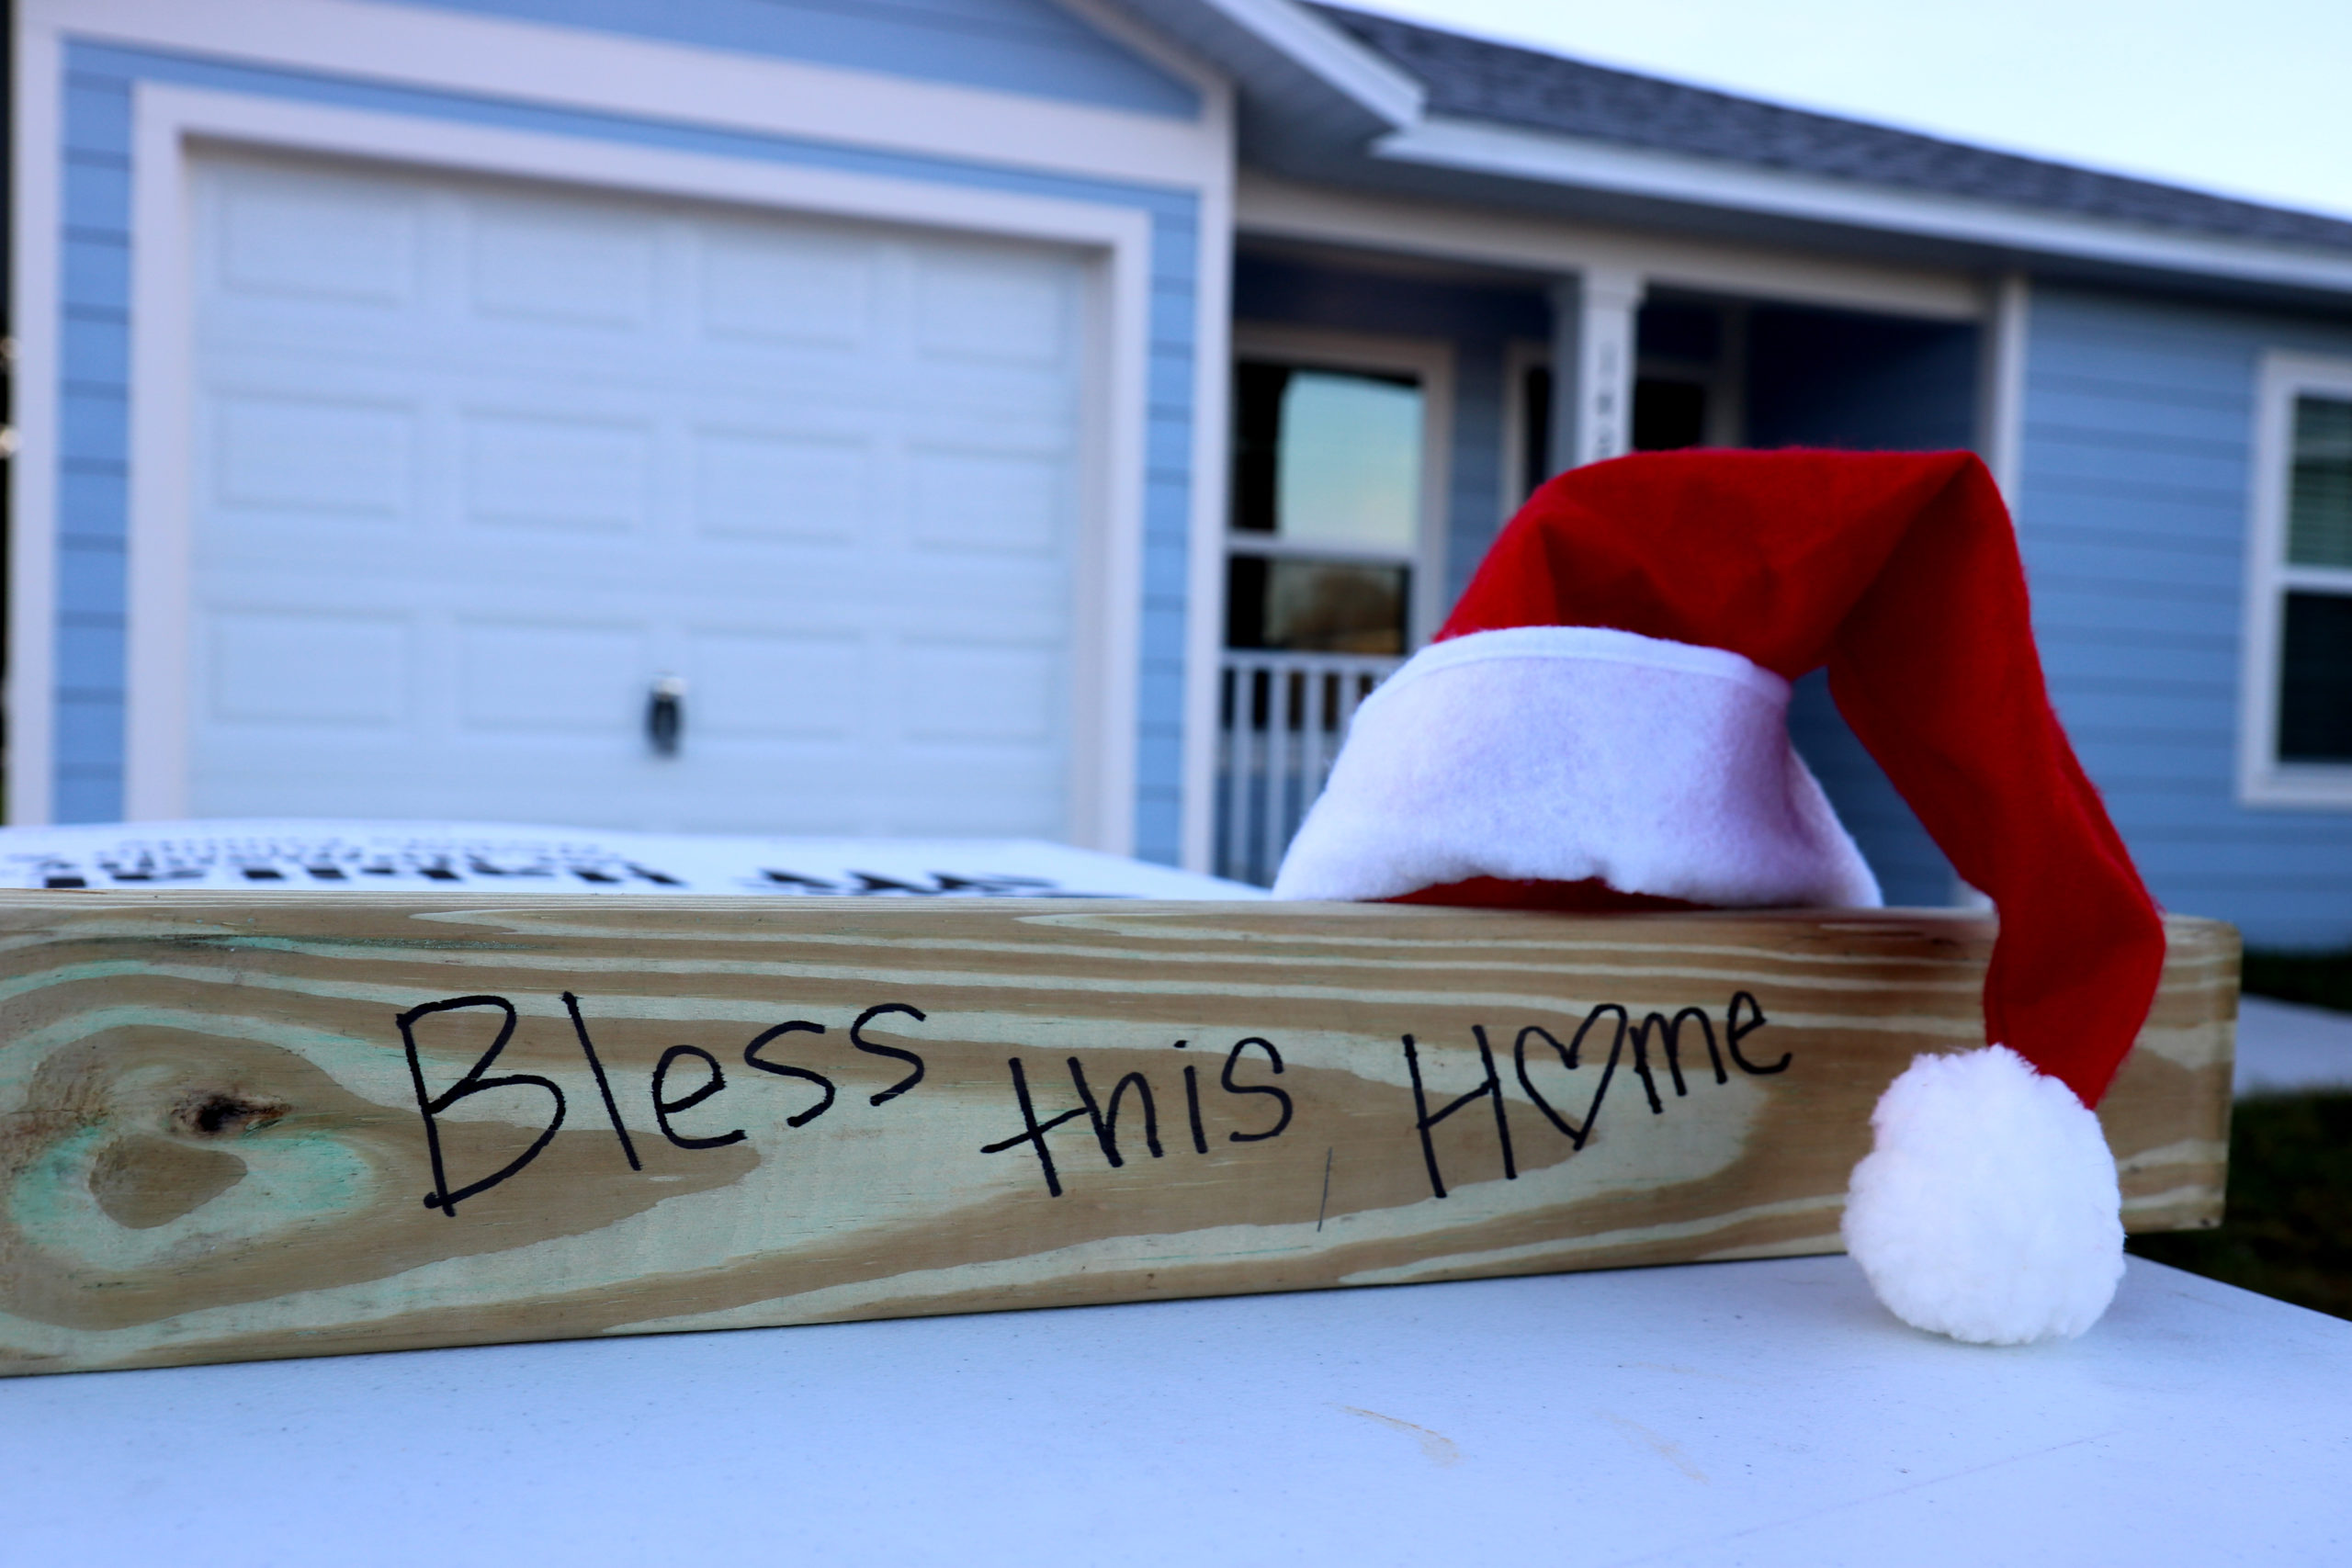 Wood beam reading "Bless this Home" with a Santa hat resting on top, in front of completed house.